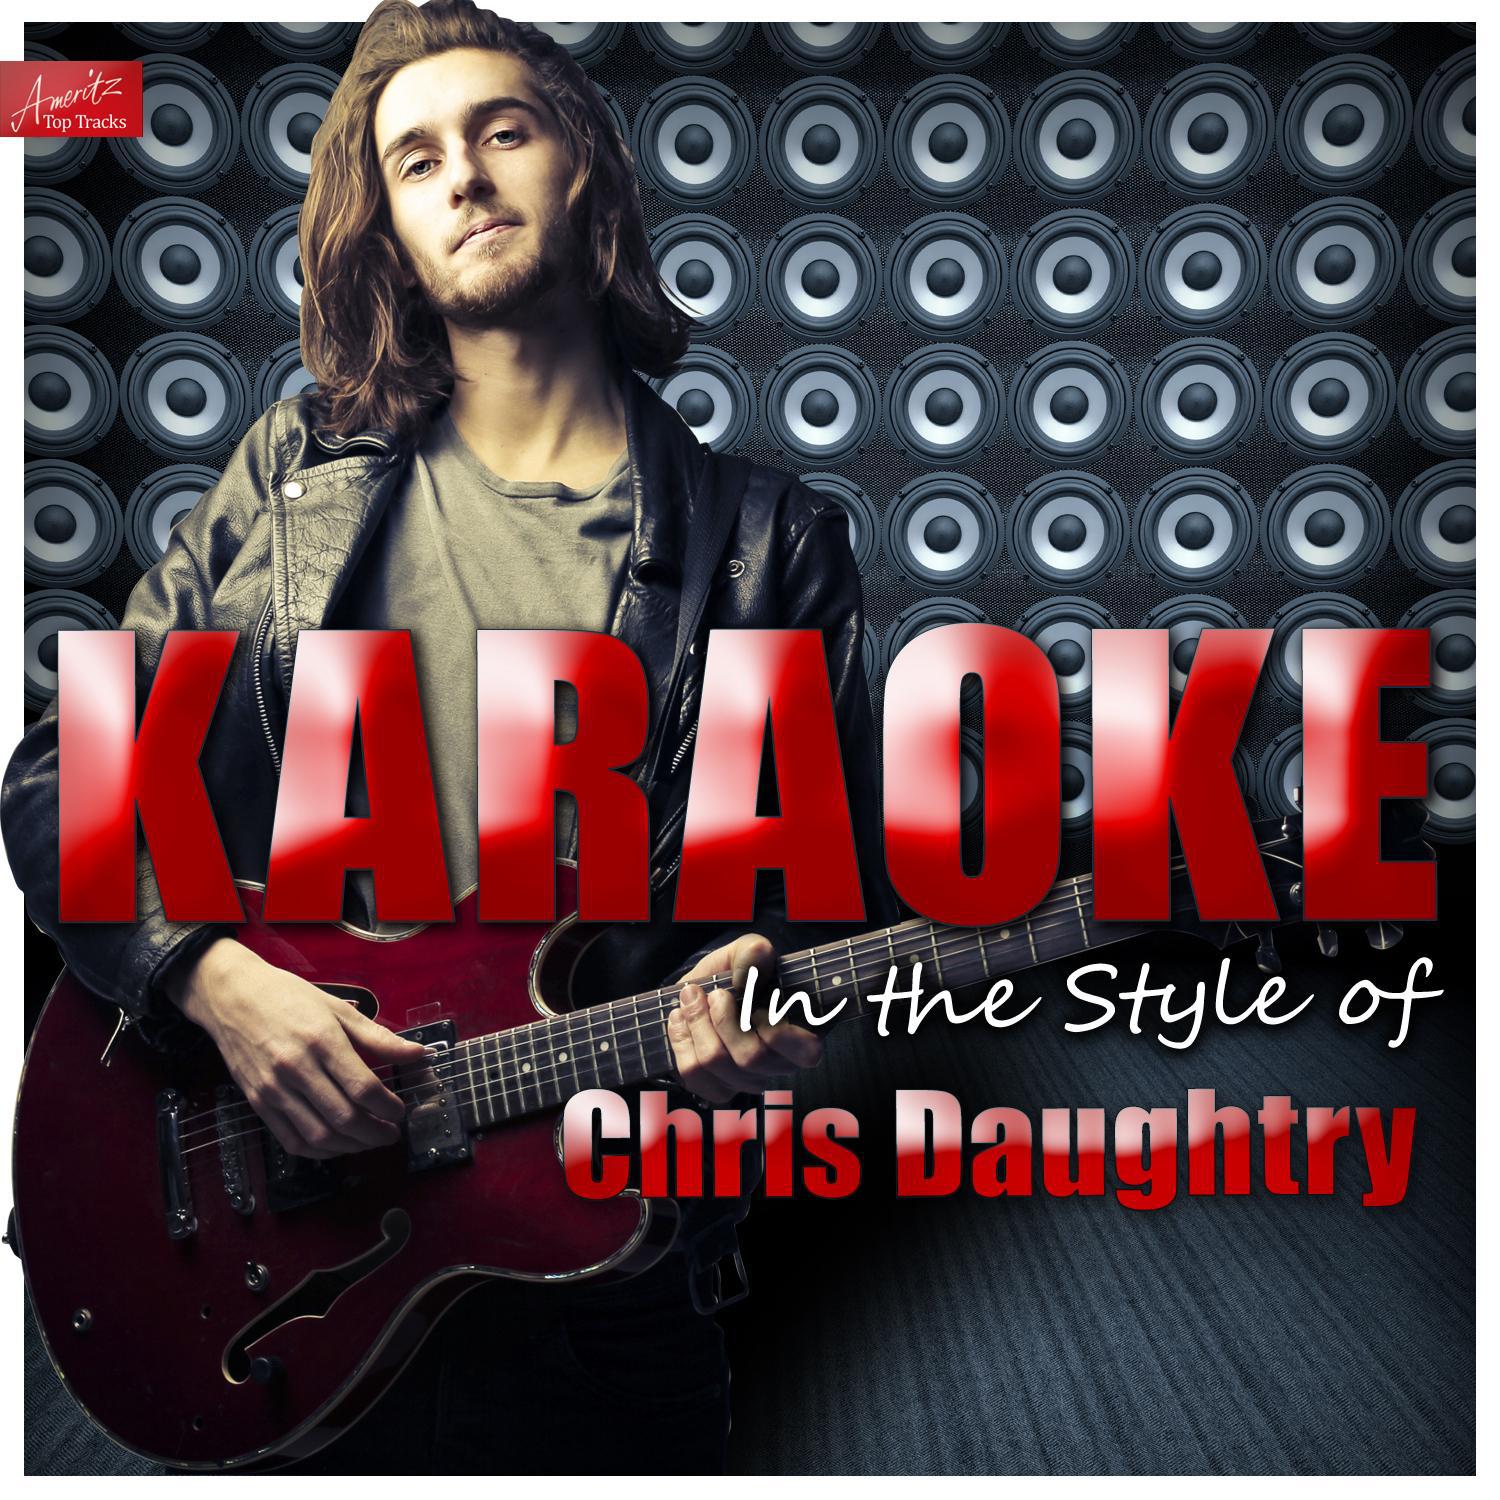 Home (In the Style of Chris Daughtry) [Karaoke Version]